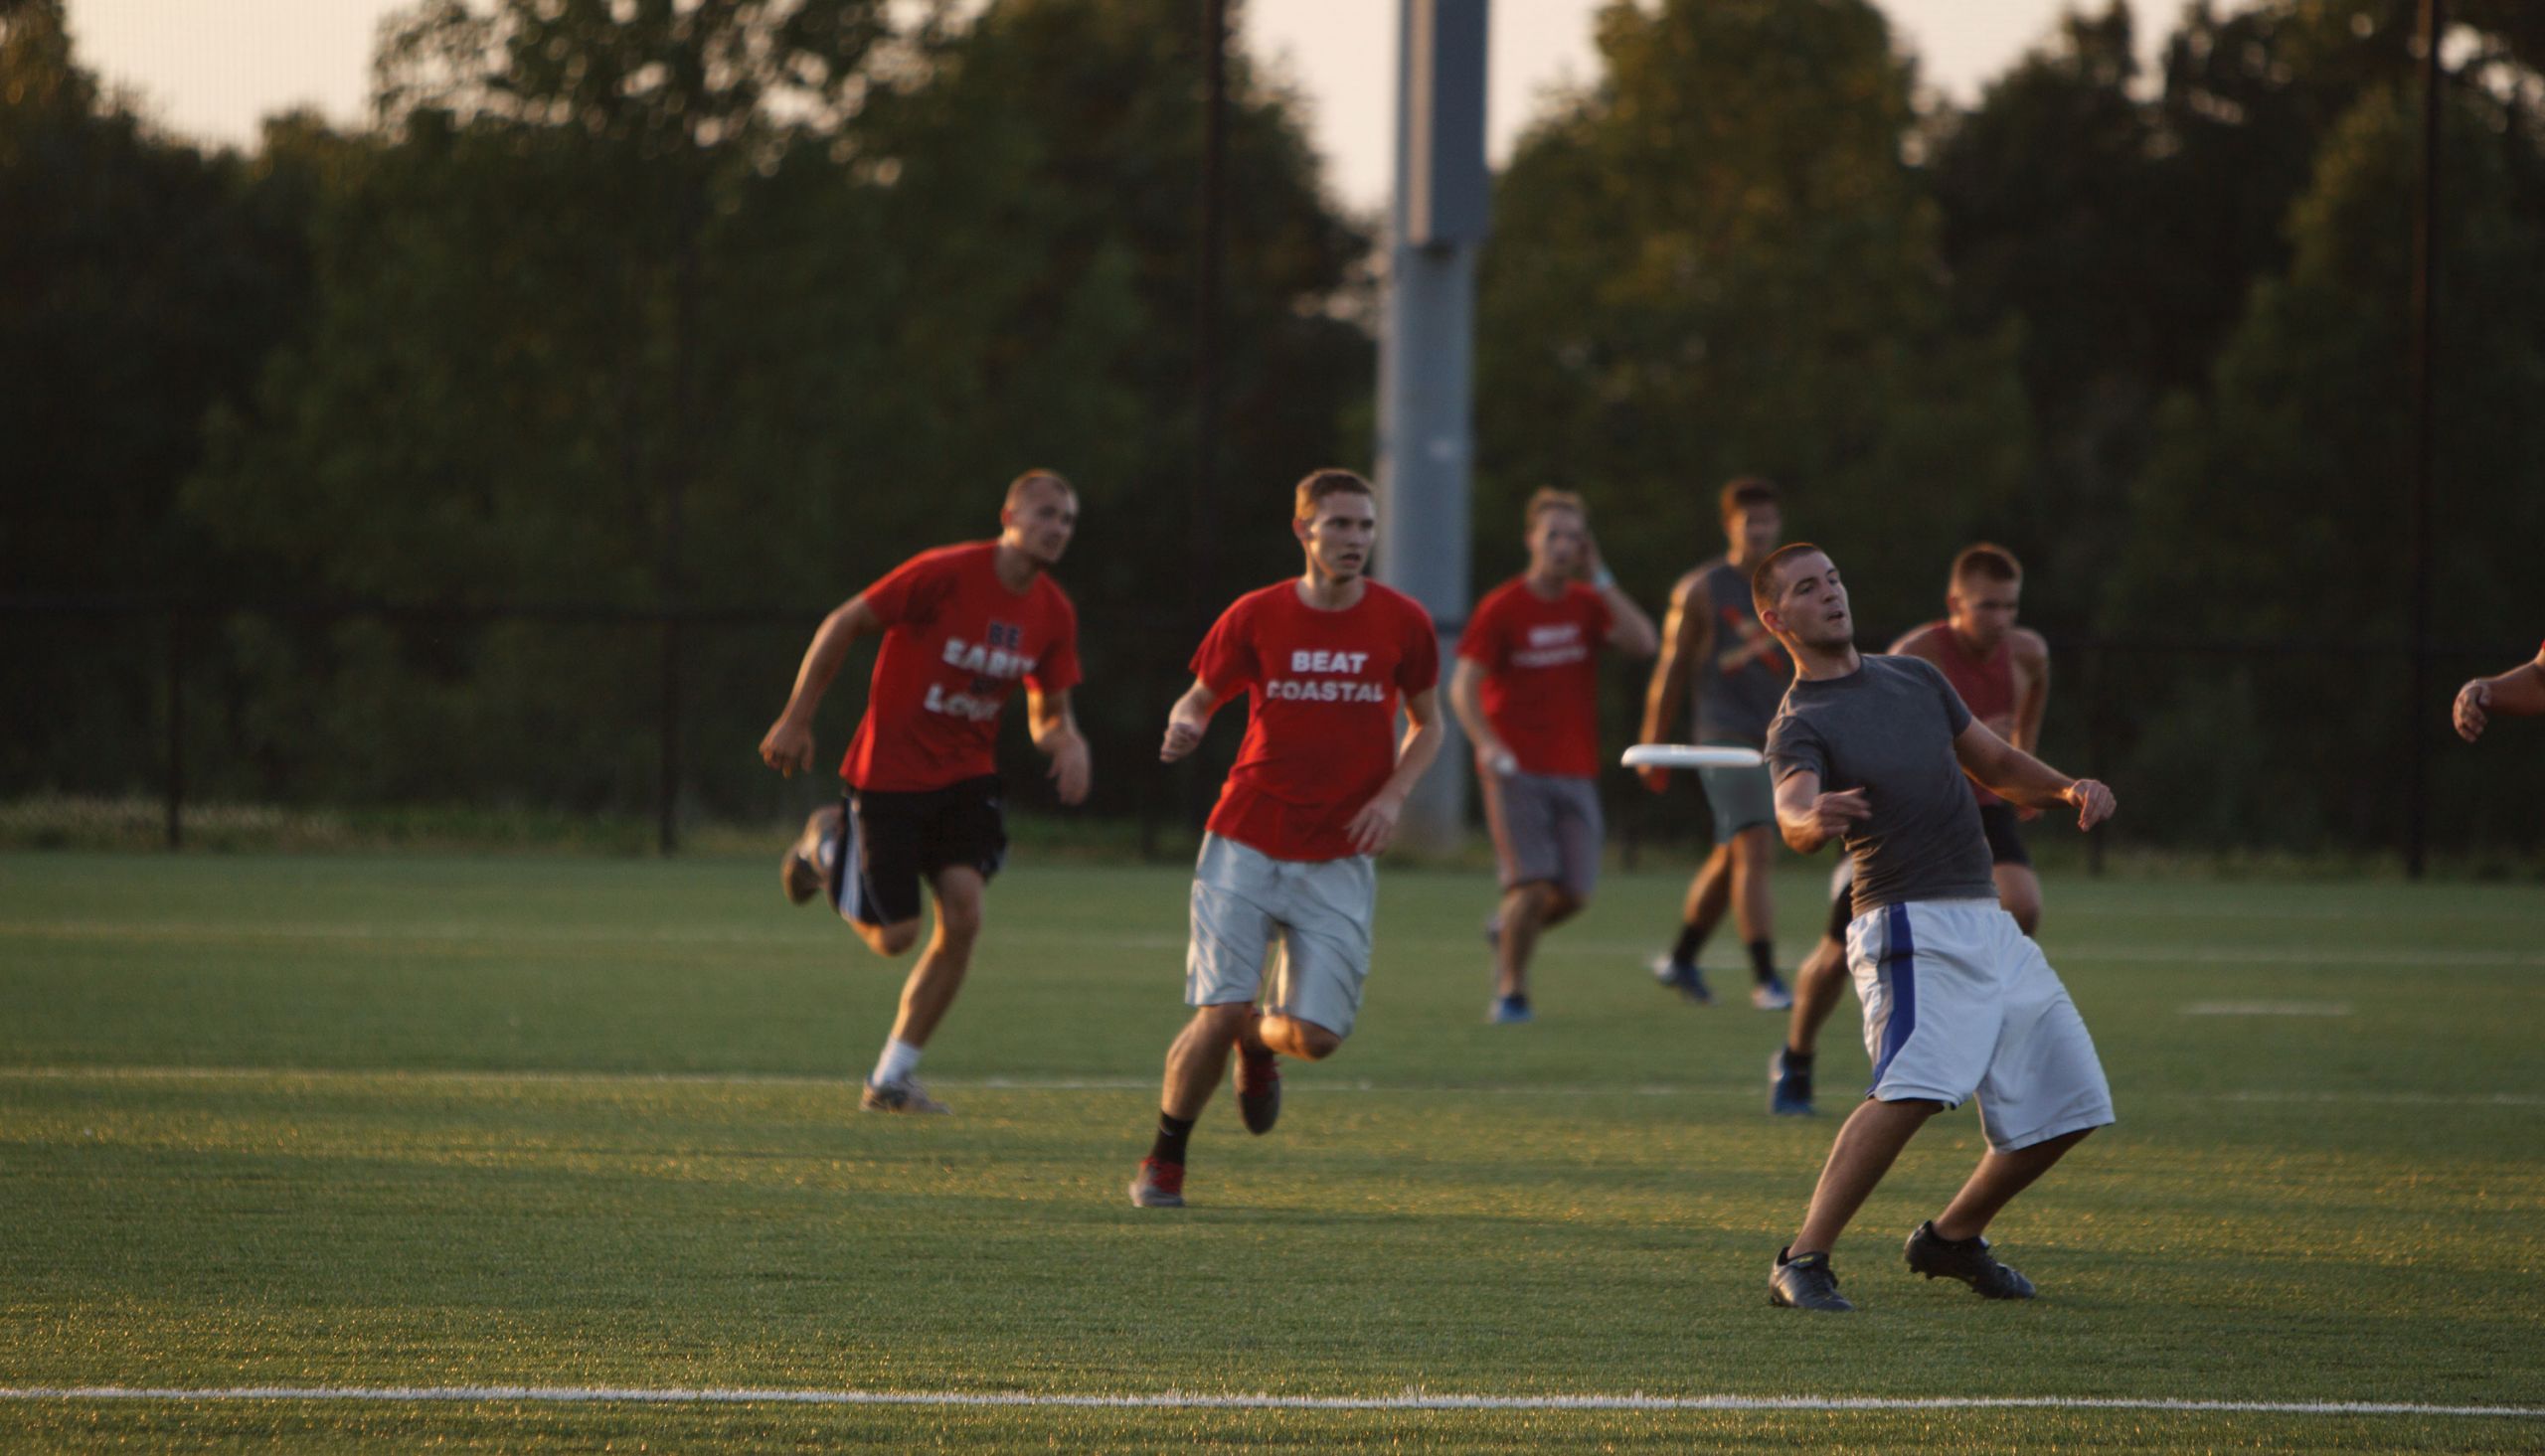 Liberty University students playing intramural ultimate frisbee.